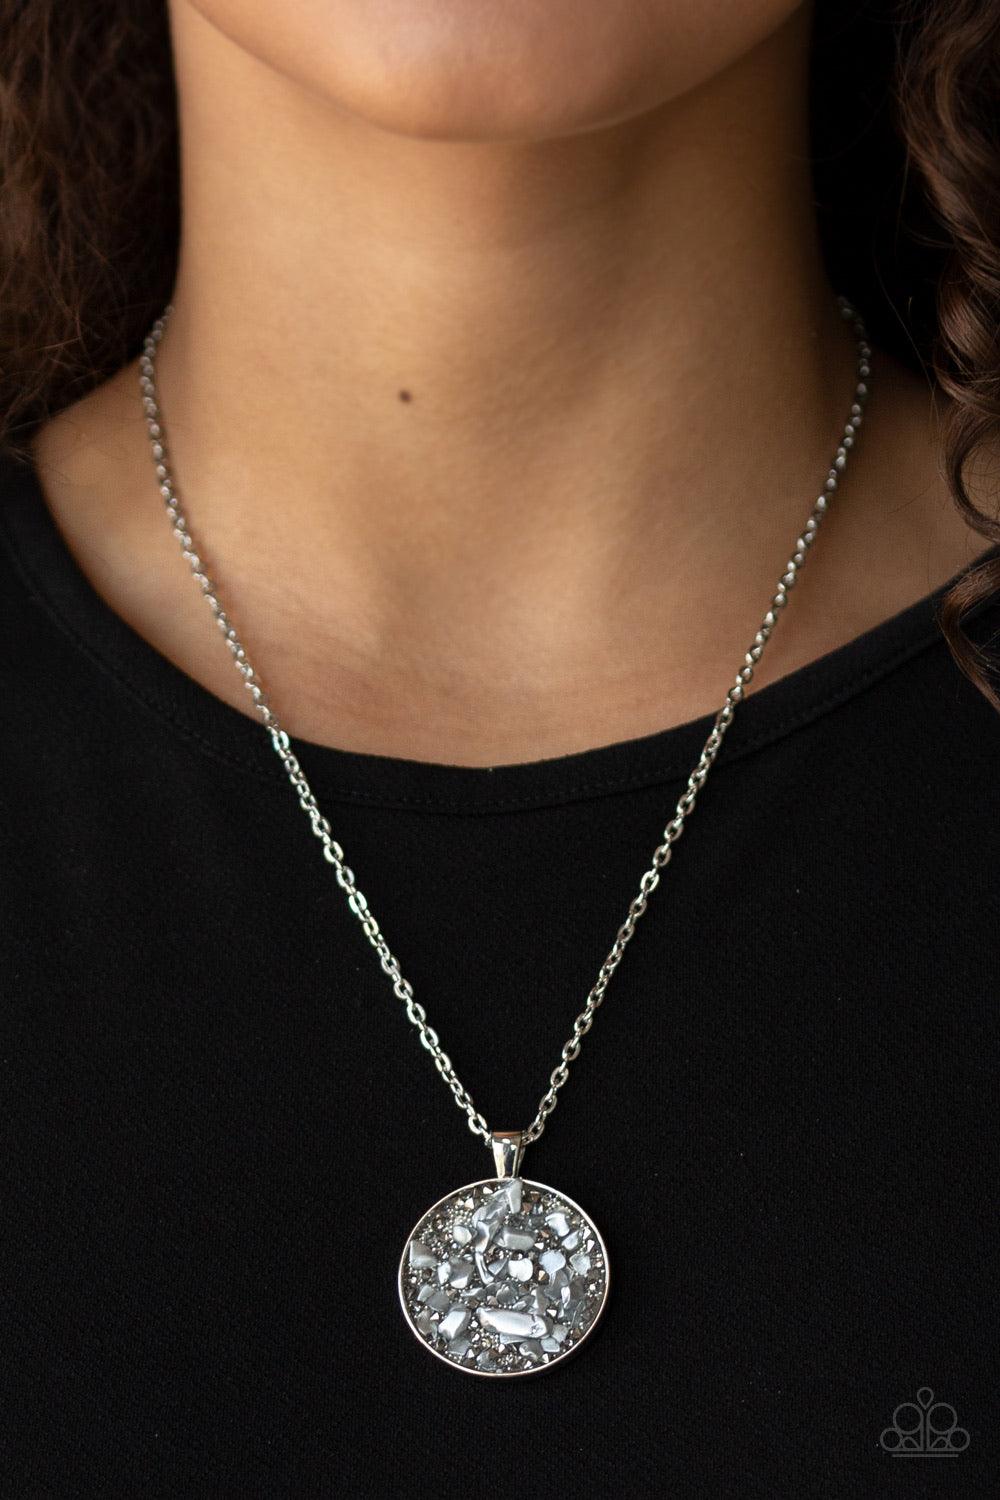 Paparazzi Accessories GLAM Crush Monday - Silver Infused with smoky and glassy rhinestone prisms, bits of metallic rock and dainty silver beads are sprinkled along the center of a round silver frame, creating a glittering pendant below the collar. Feature